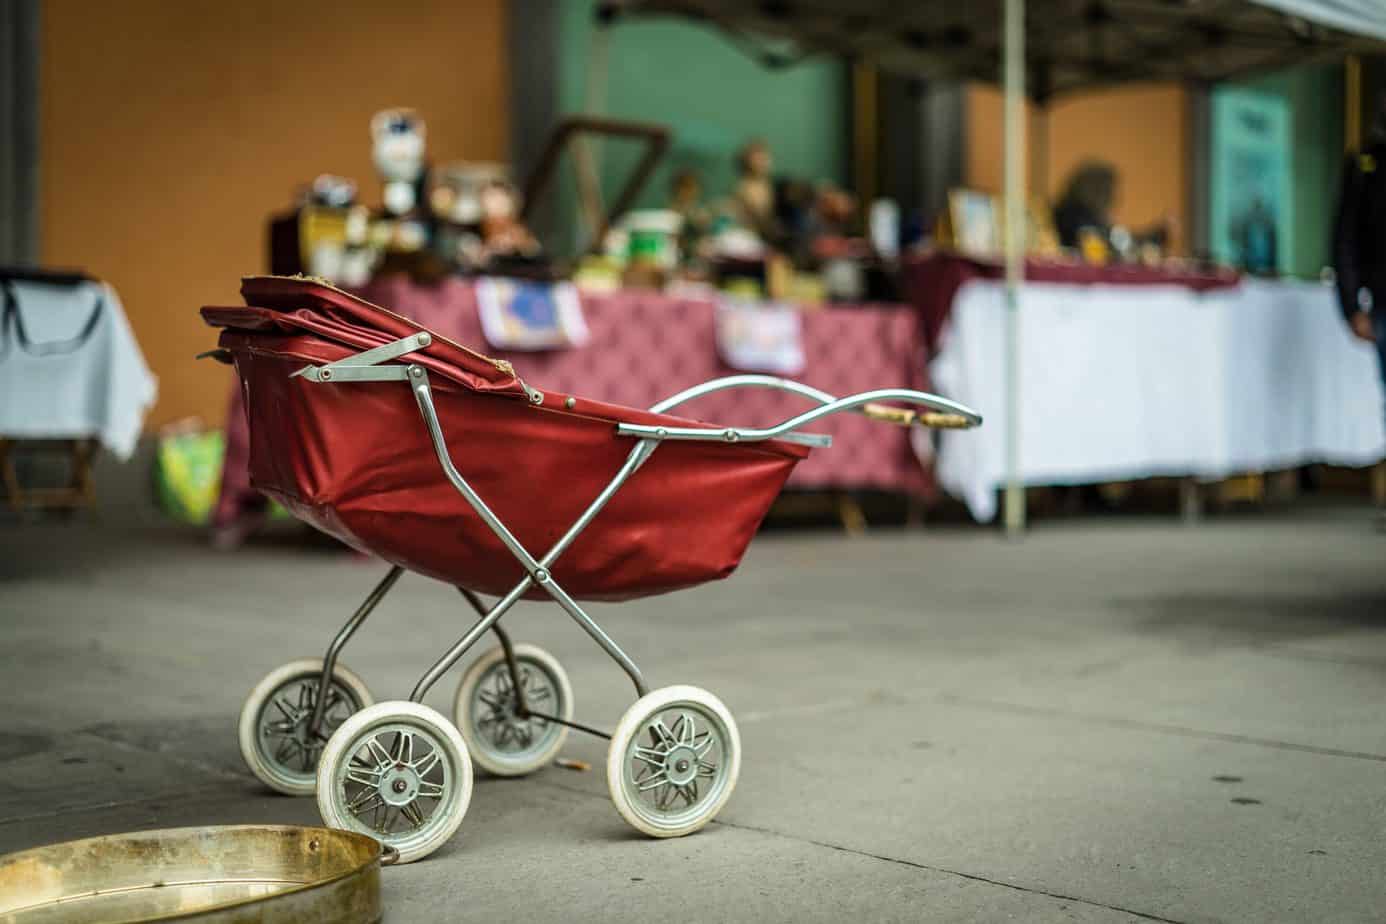 What To Do With Old Strollers